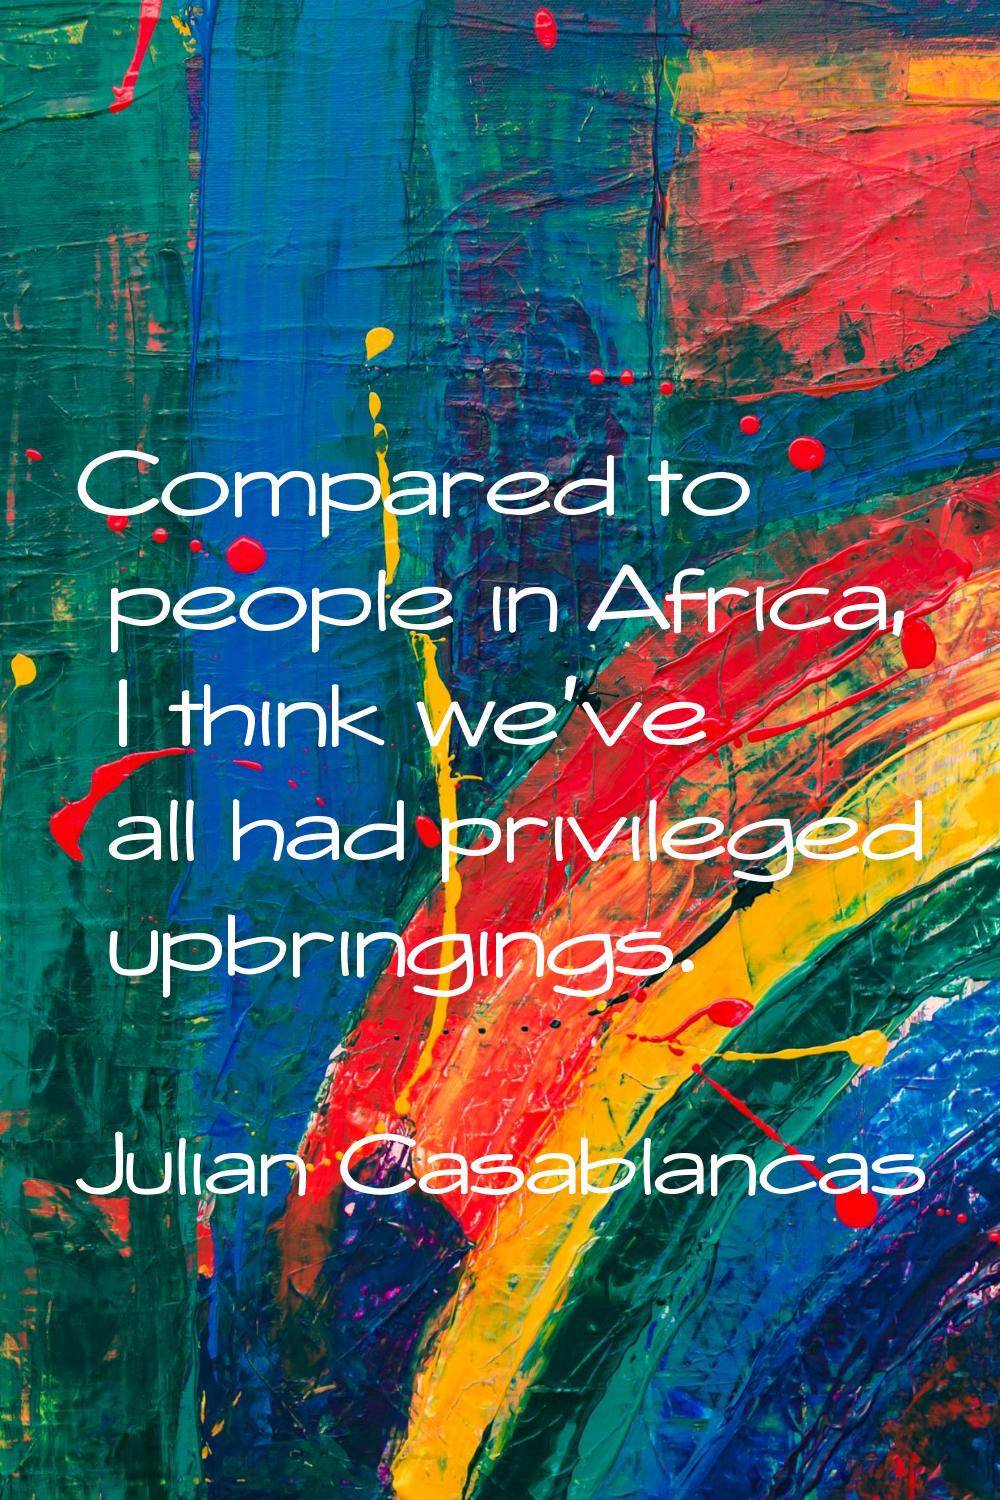 Compared to people in Africa, I think we've all had privileged upbringings.